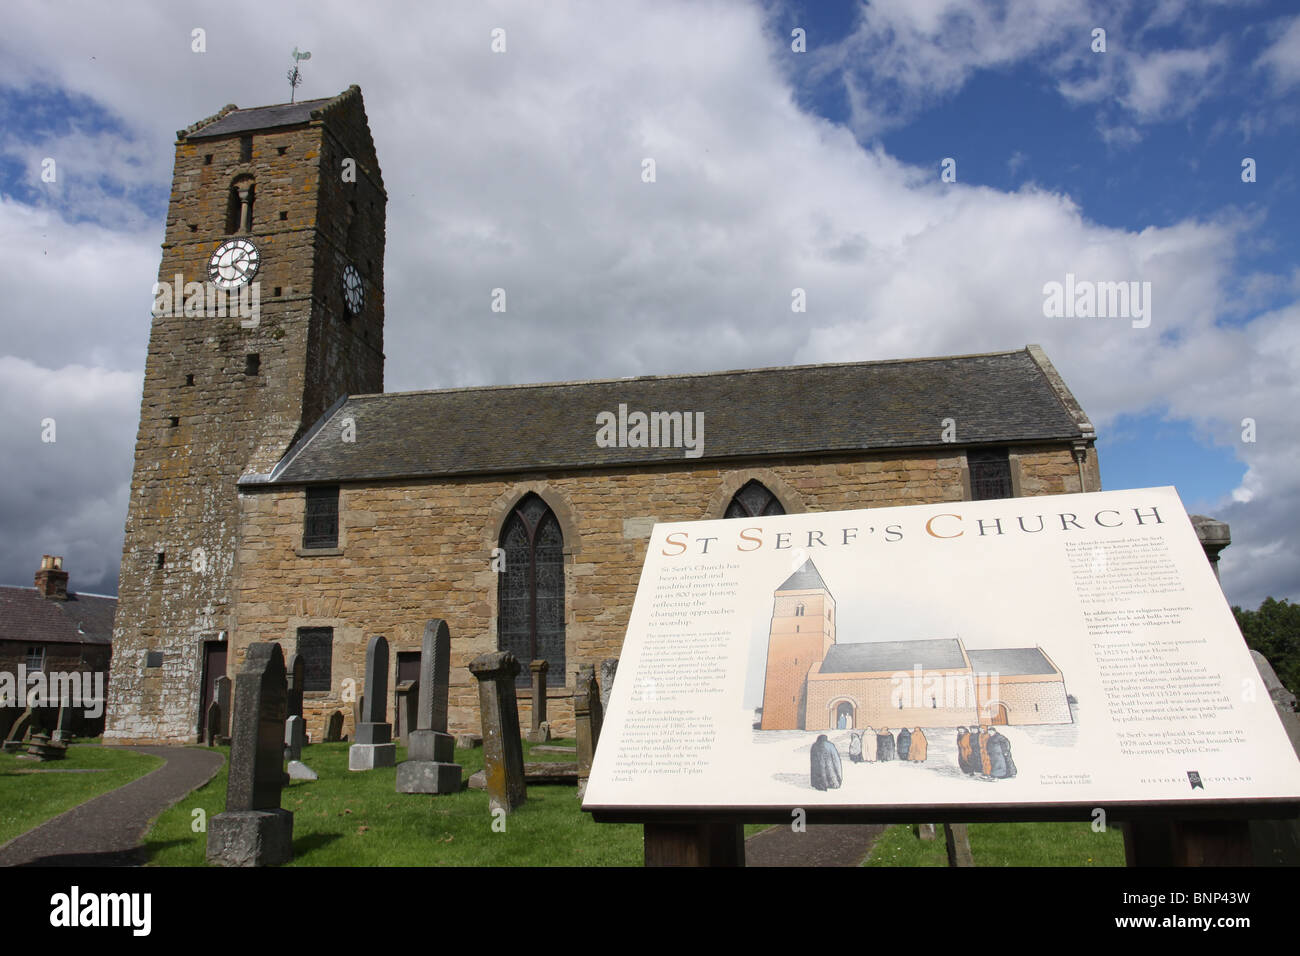 exterior of St Serf's Church Dunning Scotland  July 2010 Stock Photo